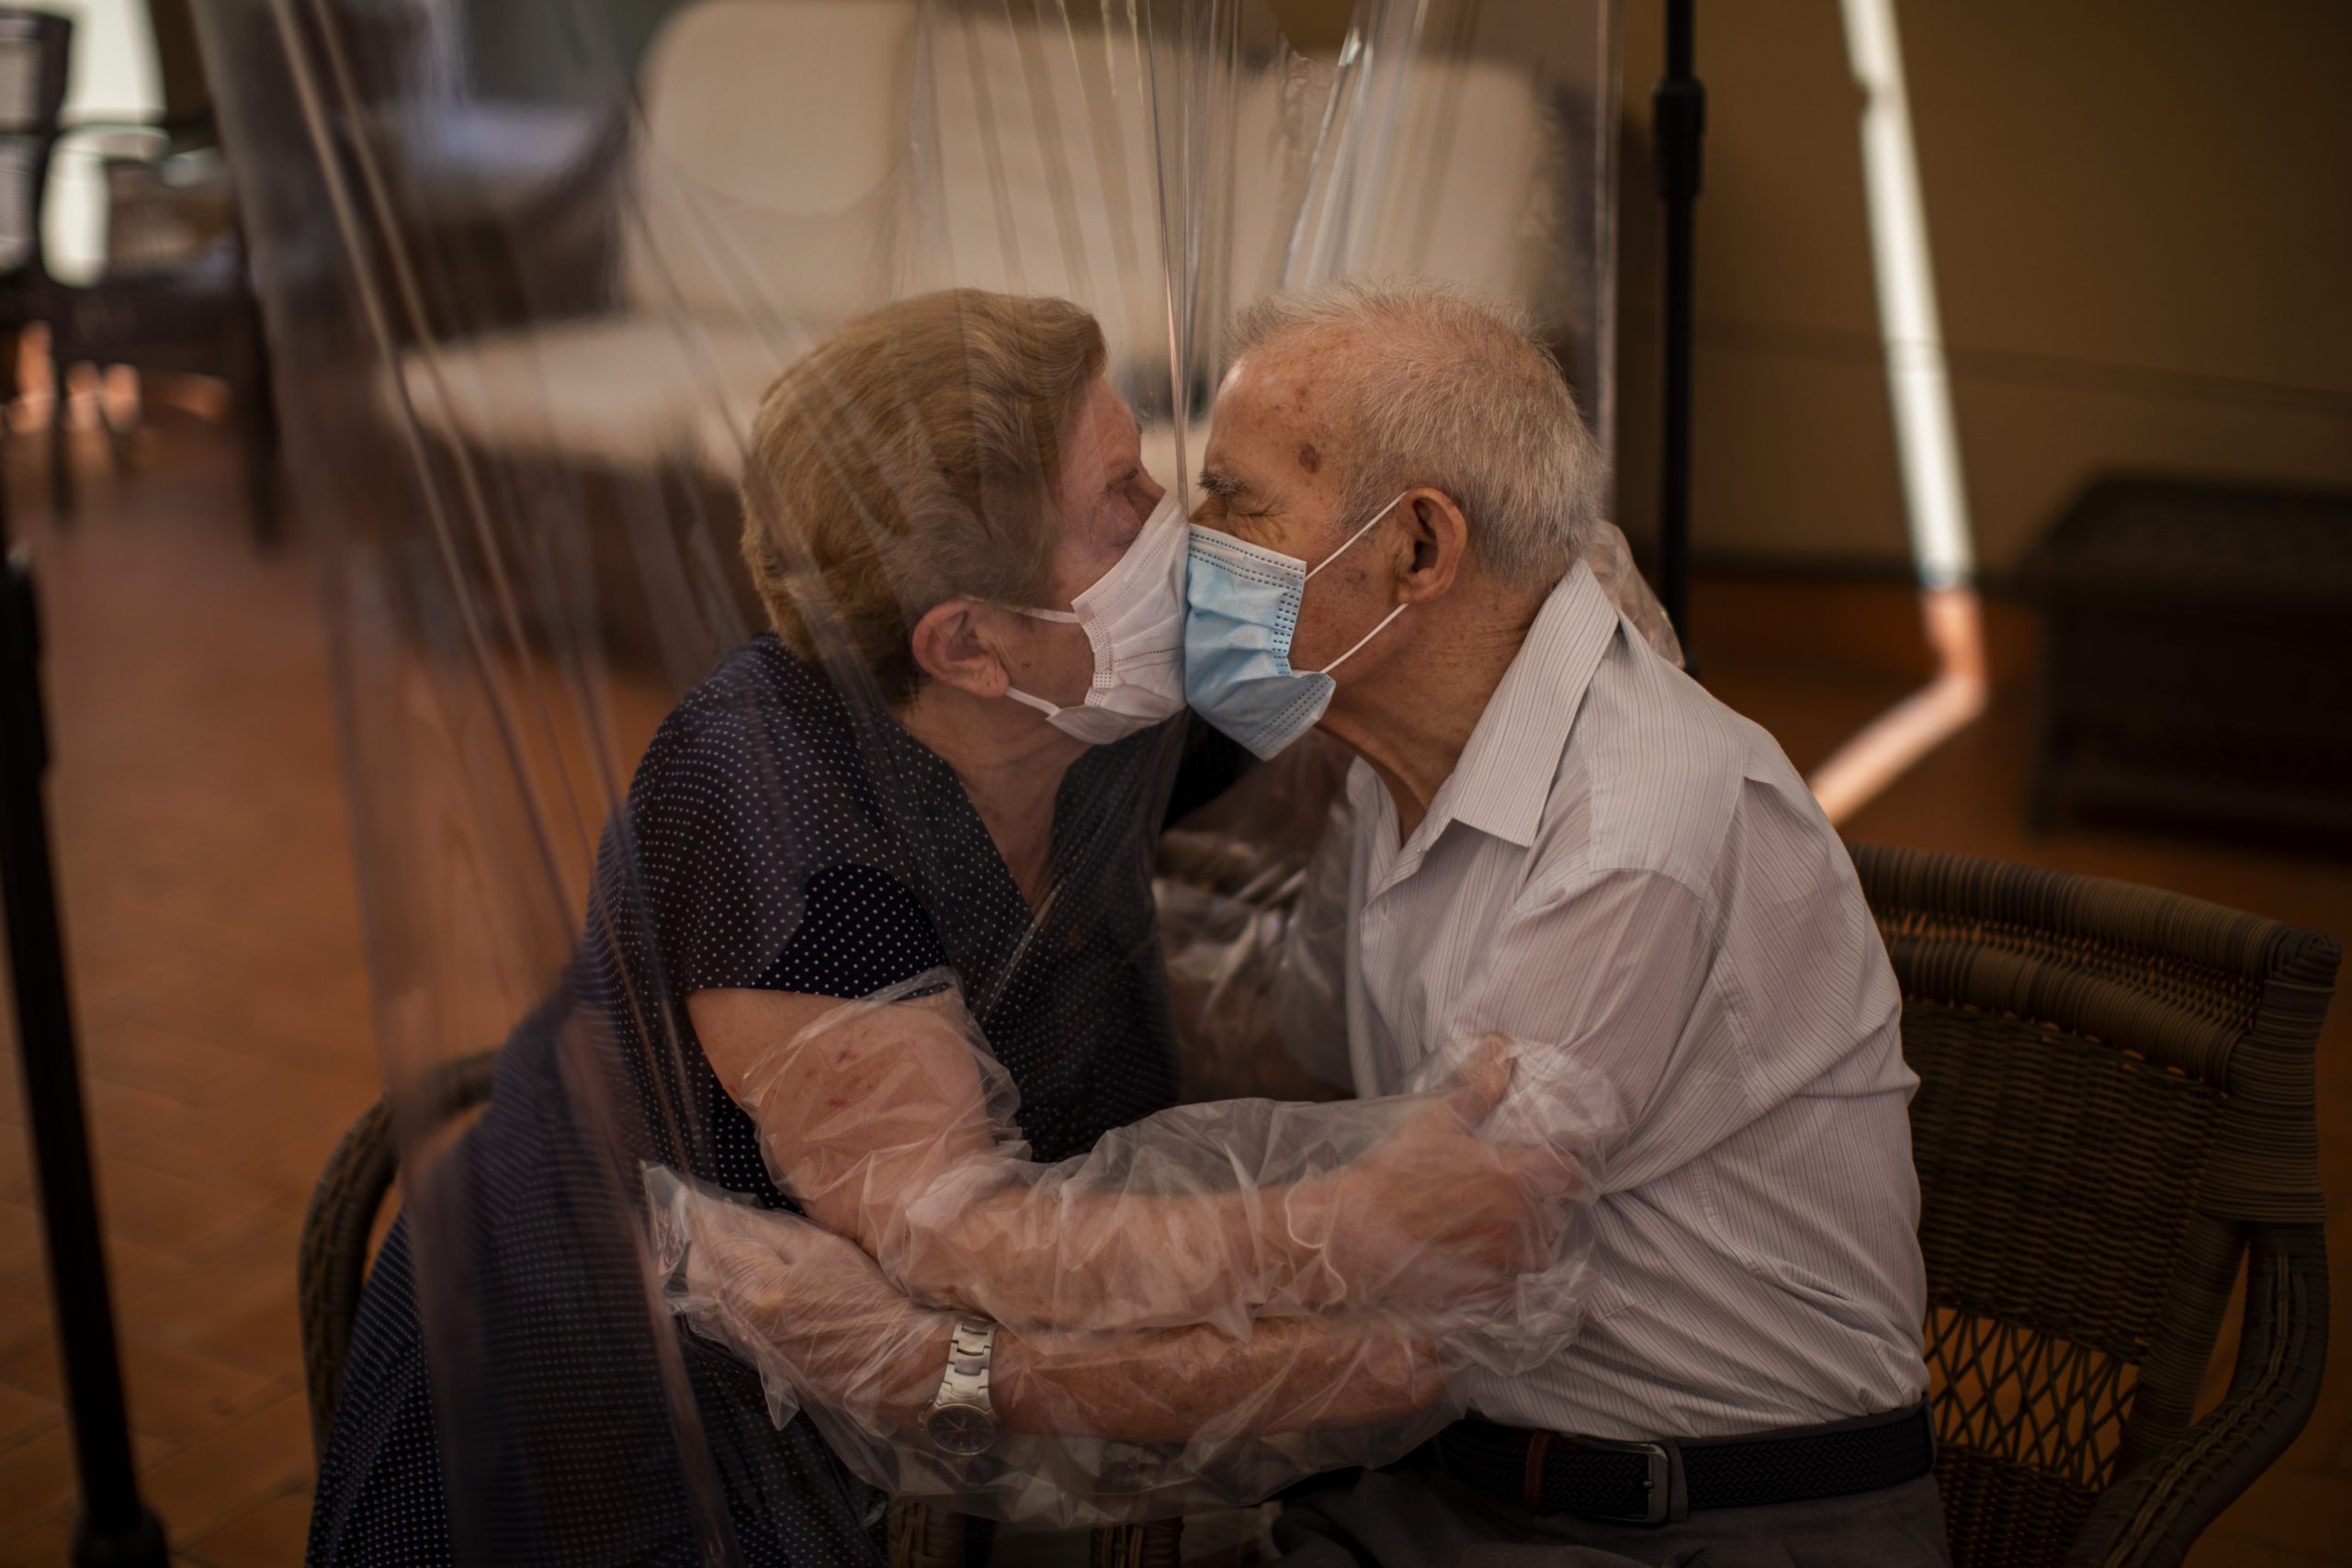 In this Monday, June 22, 2020 photo, Agustina Cañamero, 81, and Pascual Pérez, 84, hug and kiss through a plastic film screen to avoid contracting the new coronavirus at a nursing home in Barcelona, Spain. Even when it comes wrapped in plastic, a hug can convey tenderness and relief, love and devotion. The fear that gripped Agustina Cañamero during the 102 days she and her 84-year-old husband spent physically separated during Spain's coronavirus outbreak dissolved the moment the couple embraced through a screen of plastic film. (AP Photo/Emilio Morenatti)